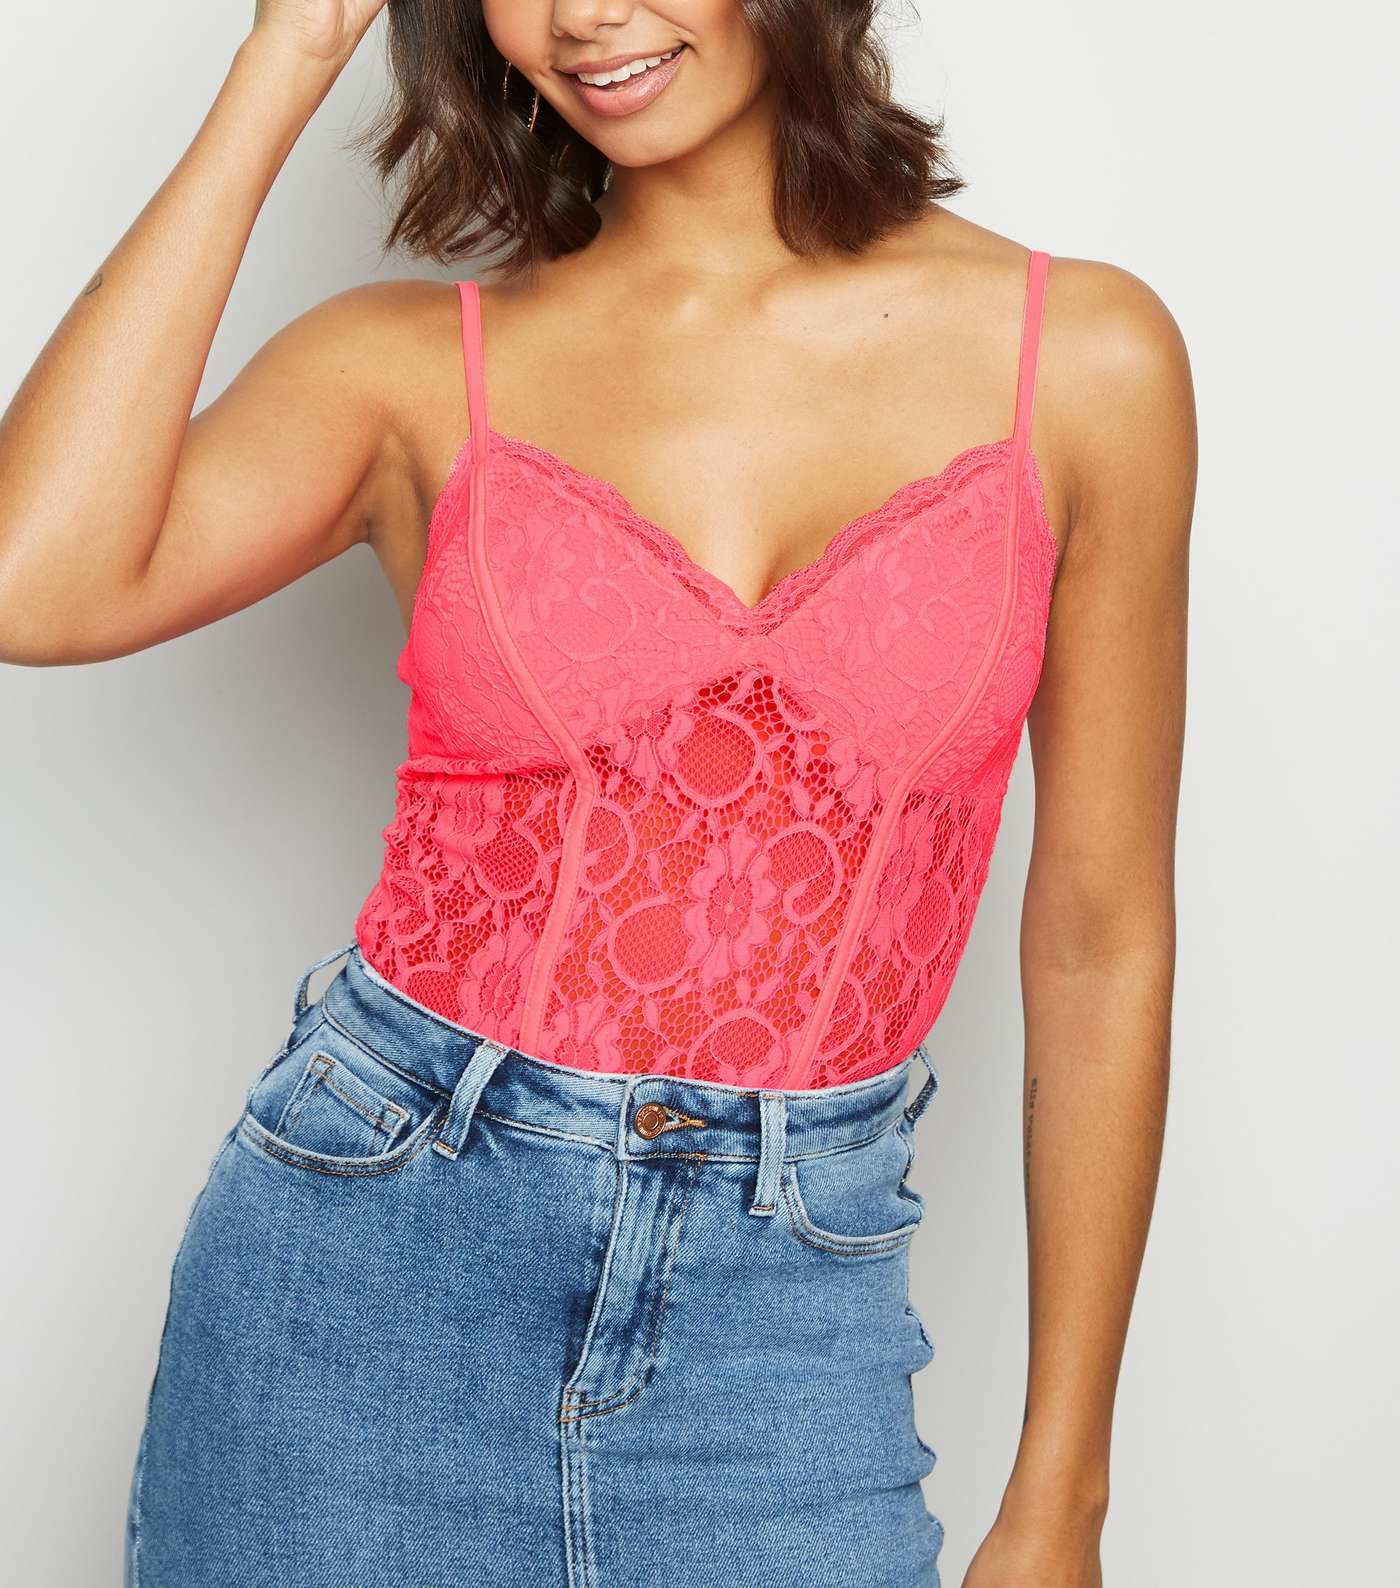 Bright Pink Neon Sheer Lace Bodysuit